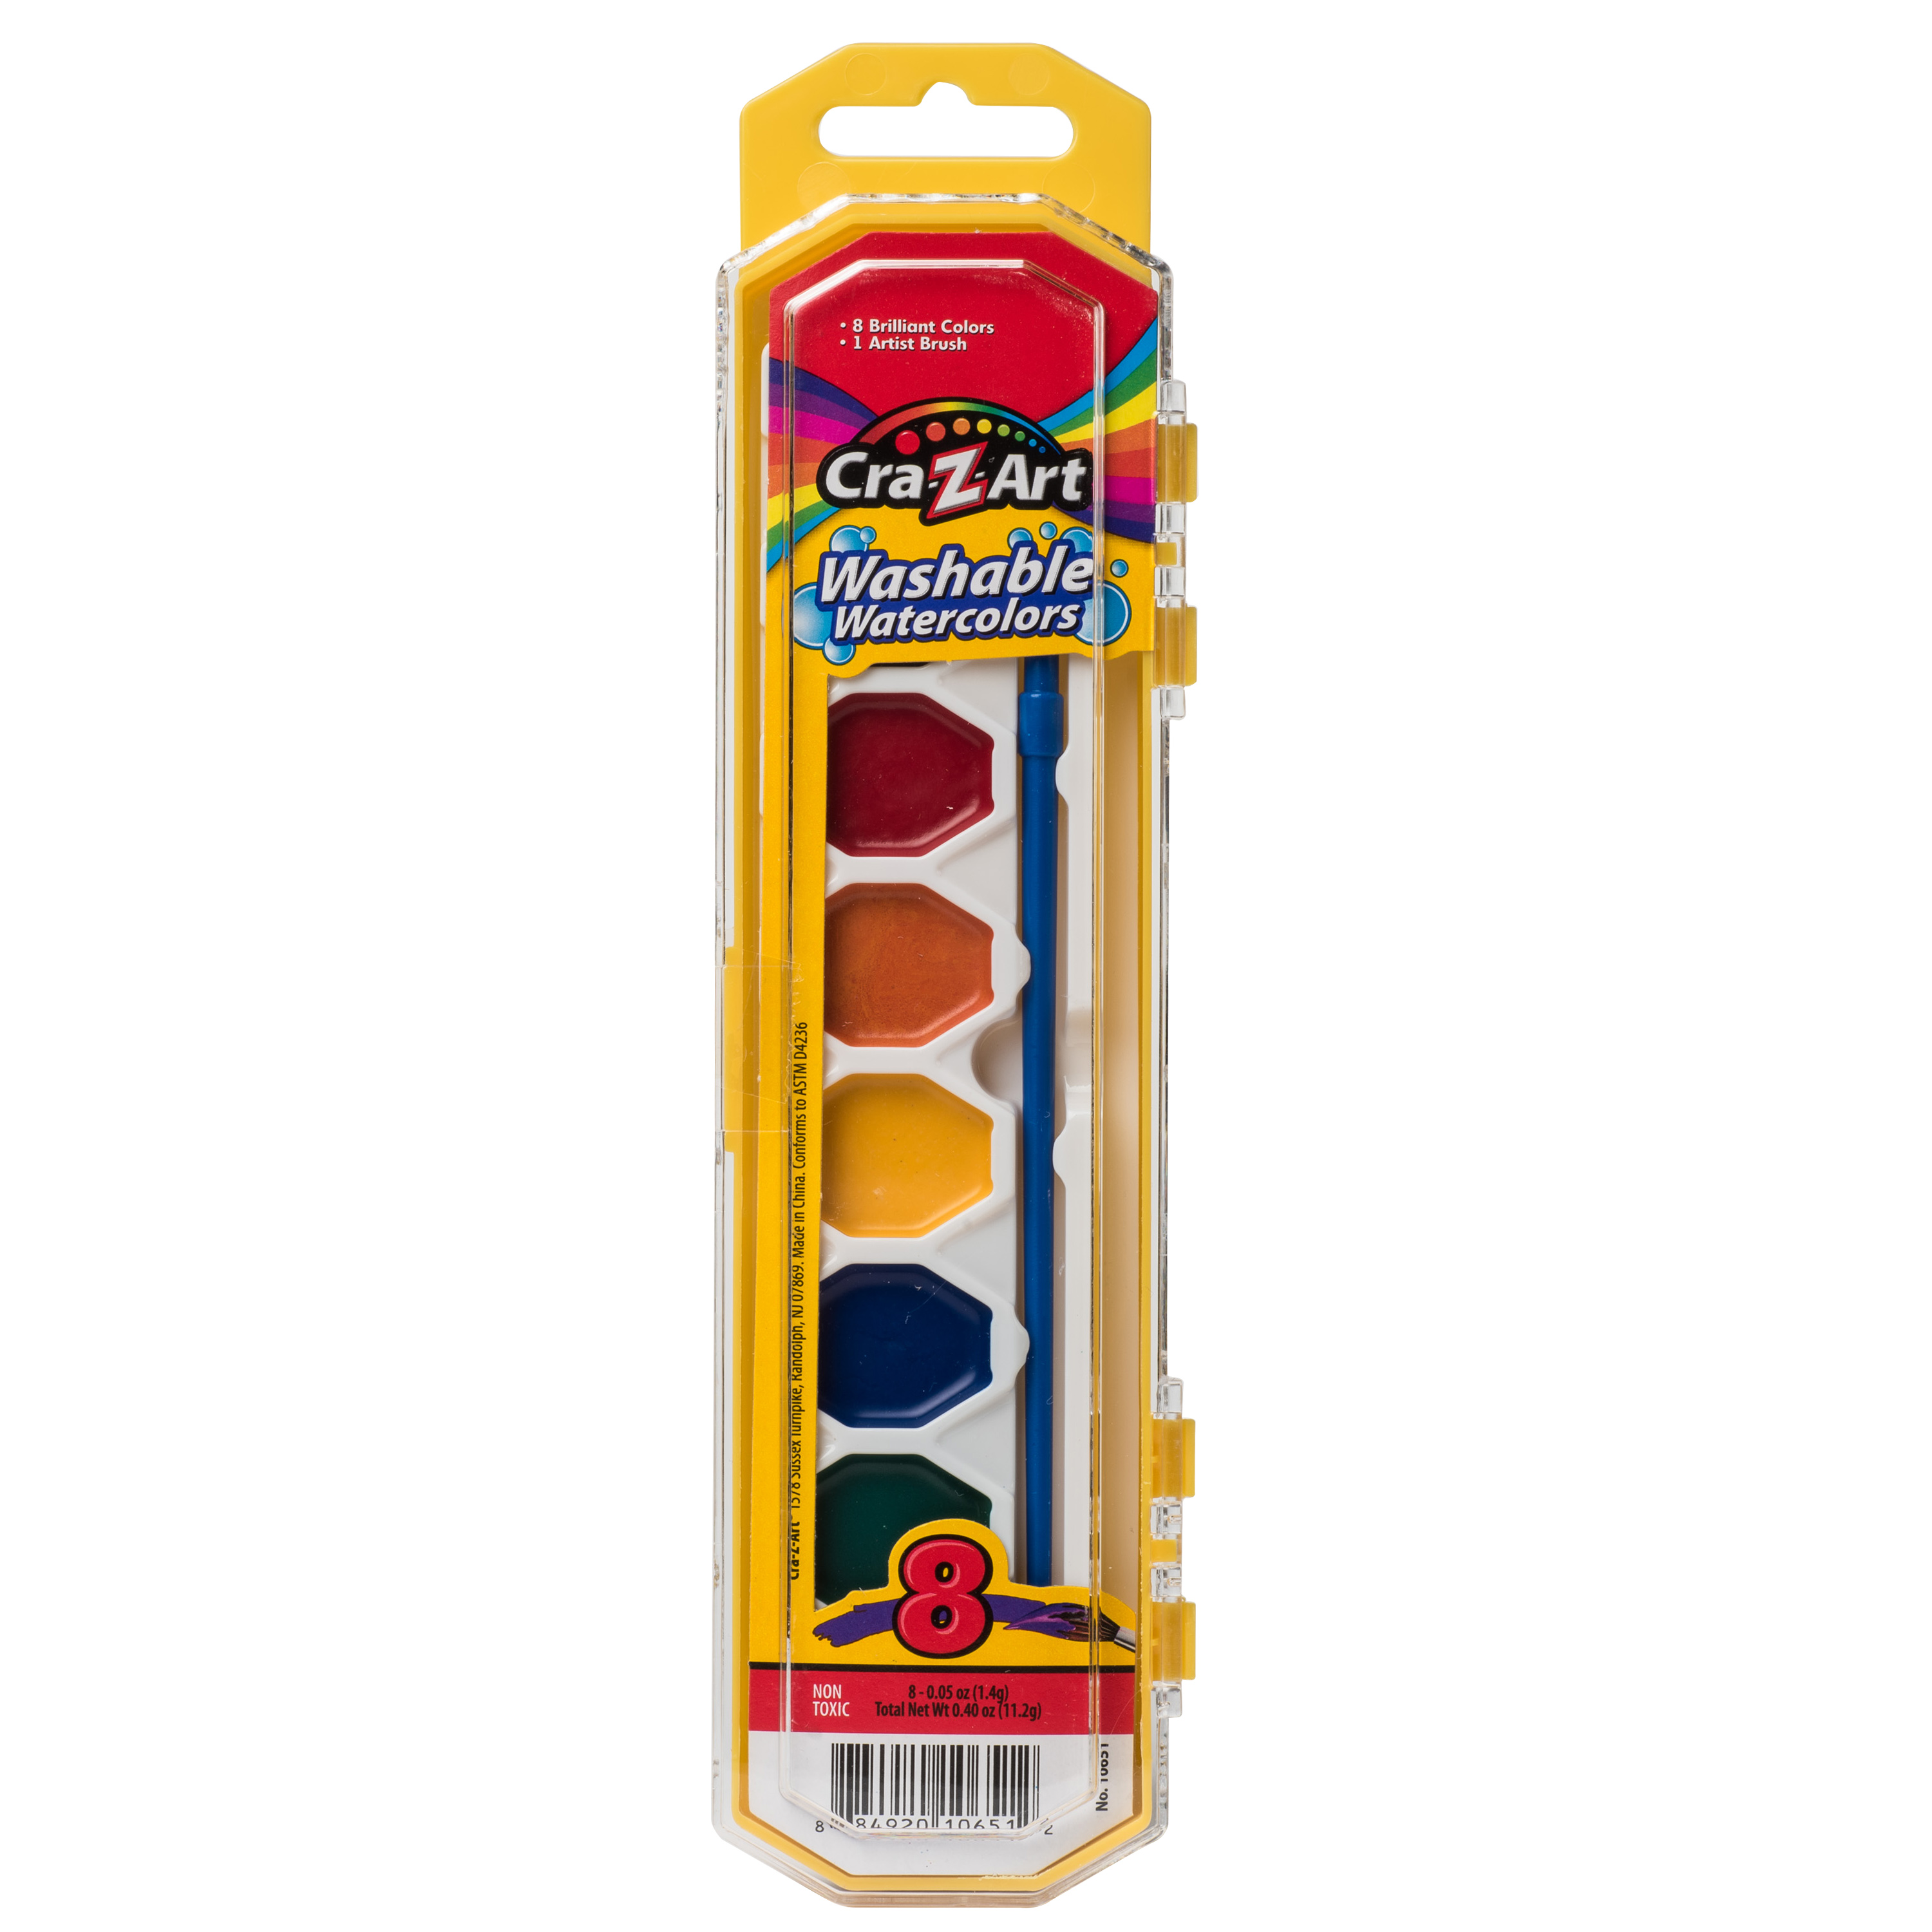 Cra-Z-Art 8 Count Washable Watercolor Paints with Brush, Multicolor, Child to Adult, Back to School - image 7 of 9